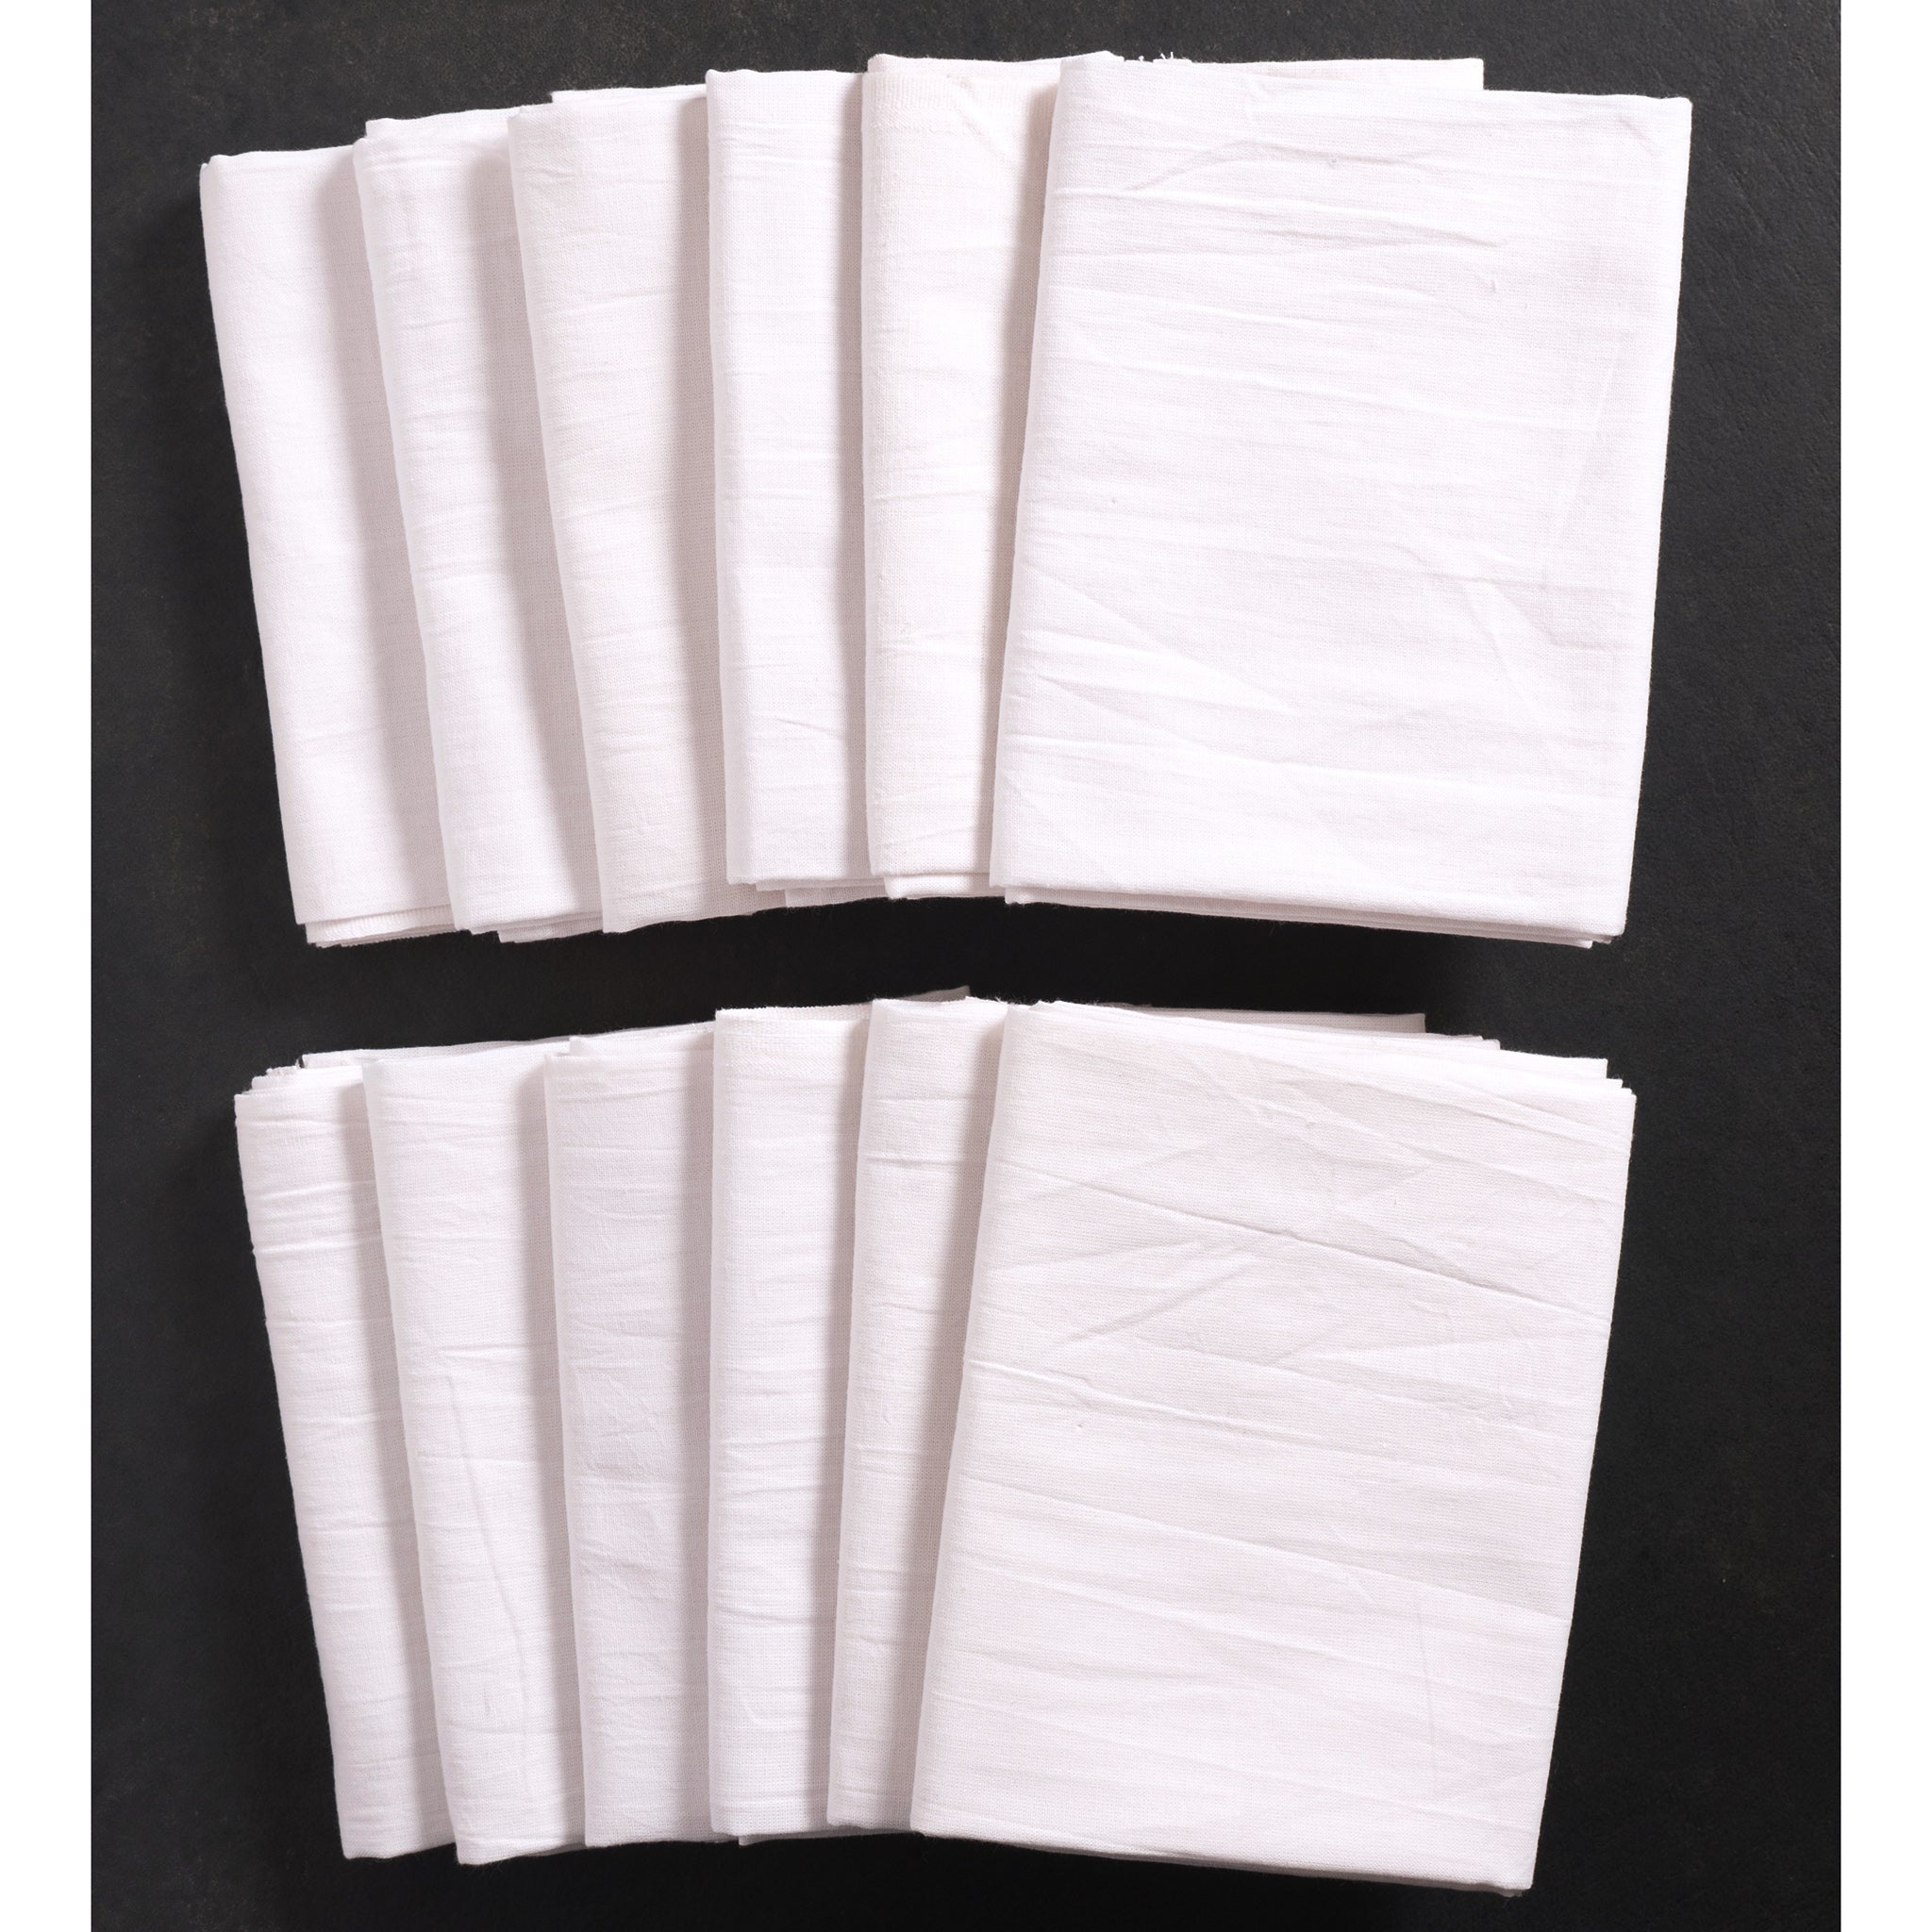 Craft Basics American 29 in. x 36 in. Soft White Flour Sack Towel (10-Pack)